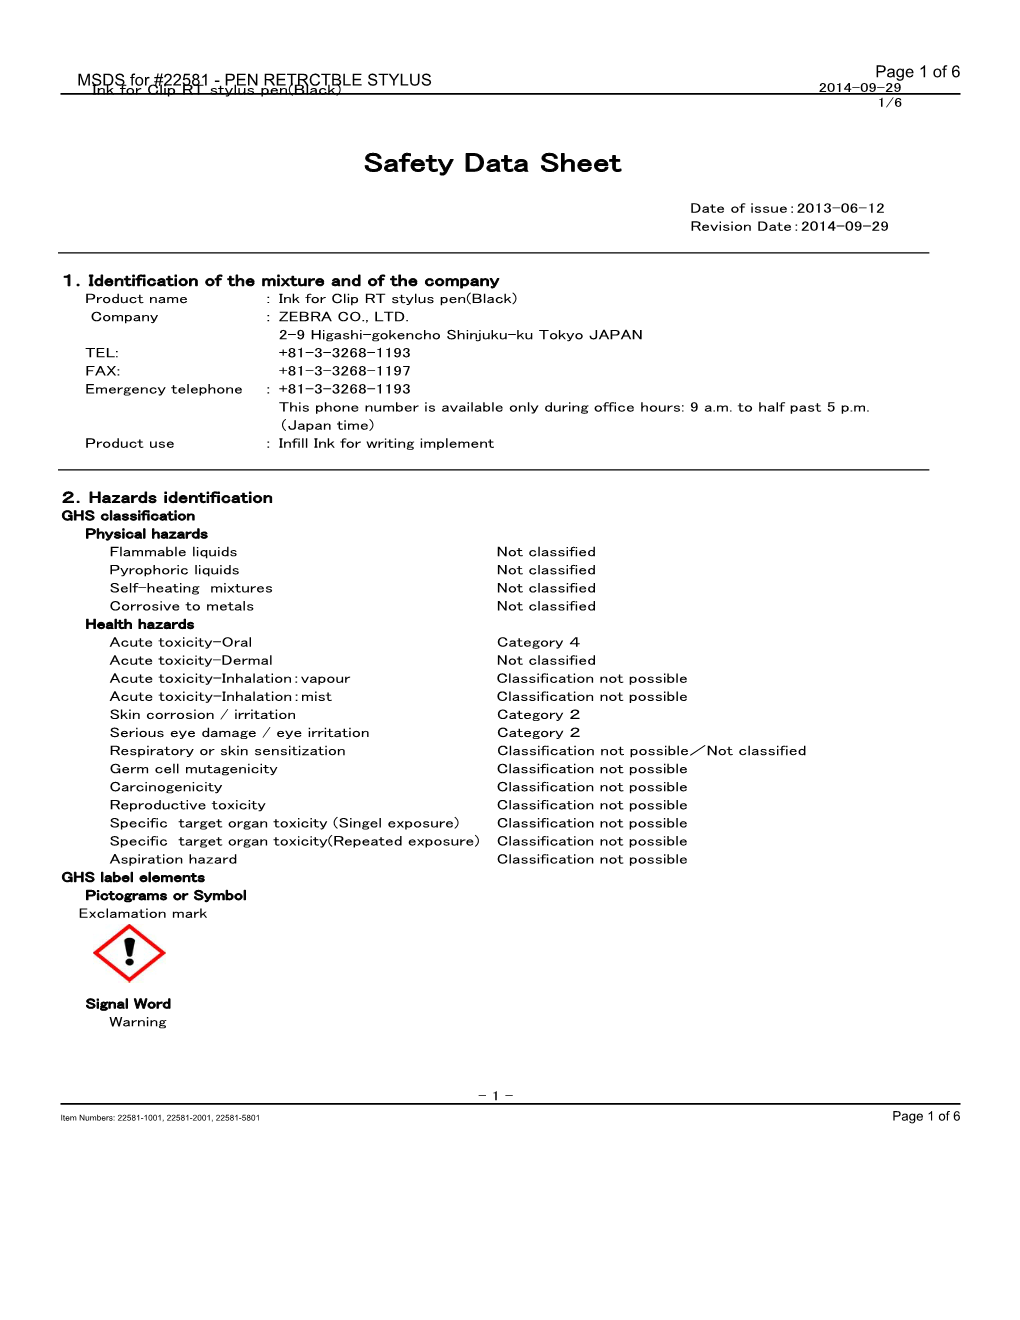 MSDS for #22581 - PEN RETRCTBLE STYLUS Page 1 of 6 Ink for Clip RT Stylus Pen(Black) 2014-09-29 1/6